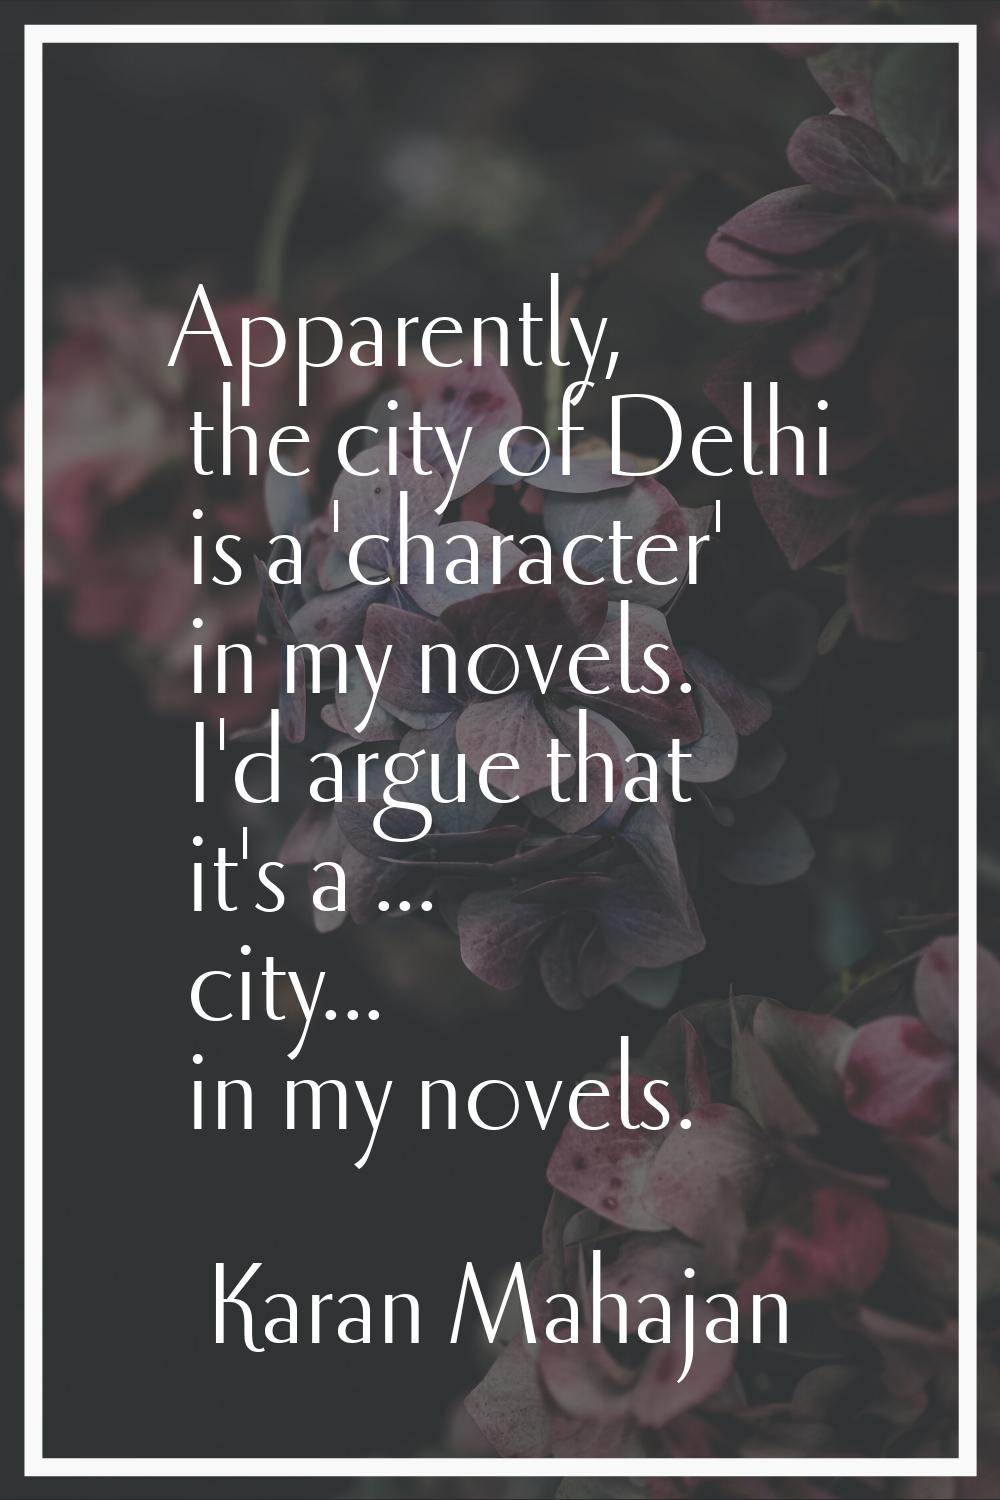 Apparently, the city of Delhi is a 'character' in my novels. I'd argue that it's a ... city... in m